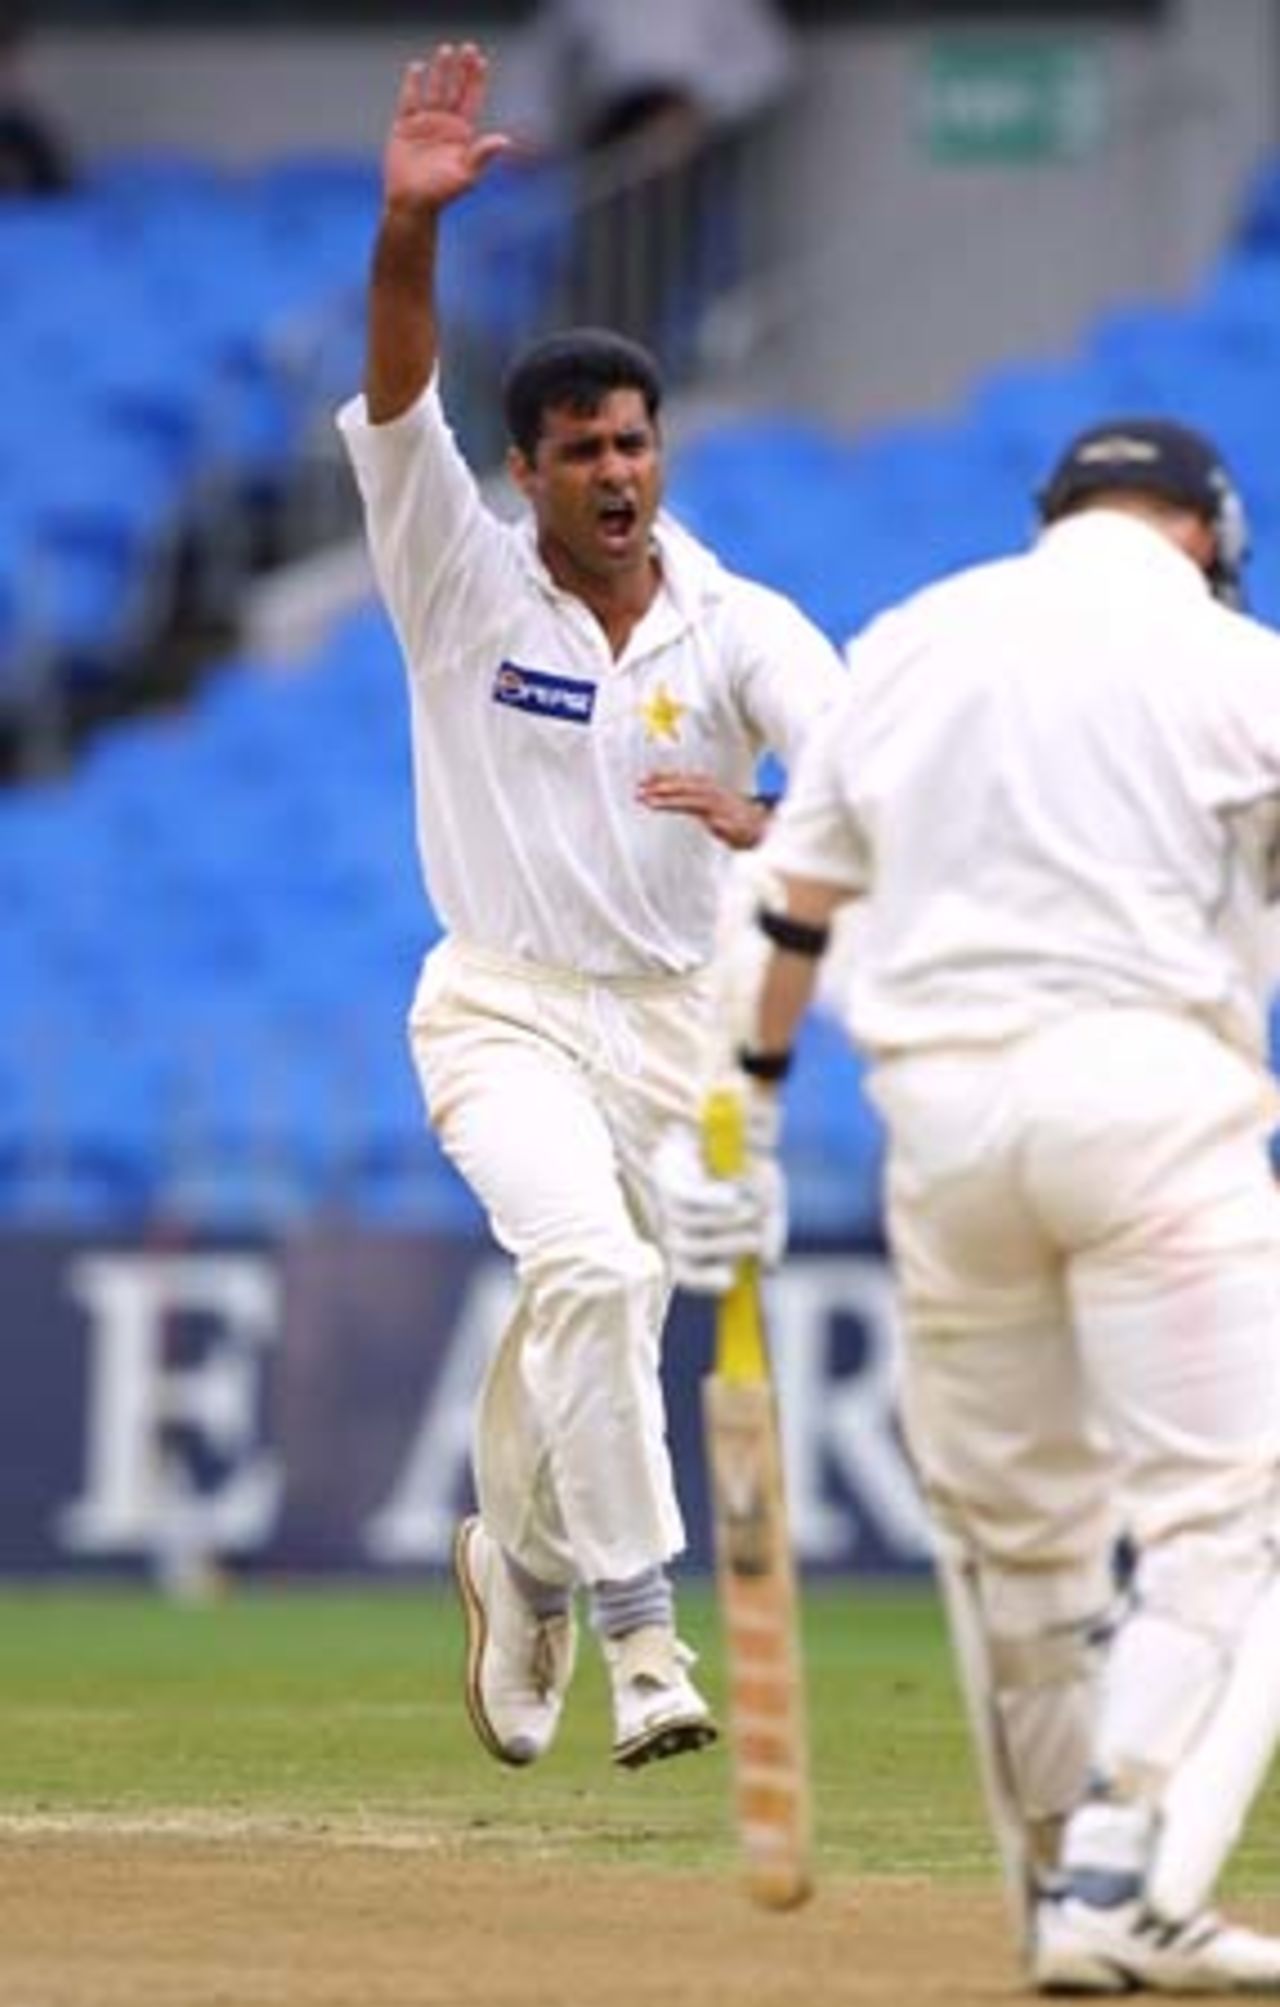 Pakistan fast medium bowler Waqar Younis runs down the wicket in celebration of dismissing New Zealand opening batsman Matthew Bell caught behind by wicket-keeper Moin Khan for a golden duck. 1st Test: New Zealand v Pakistan at Eden Park, Auckland, 8-12 March 2001 (9 March 2001).